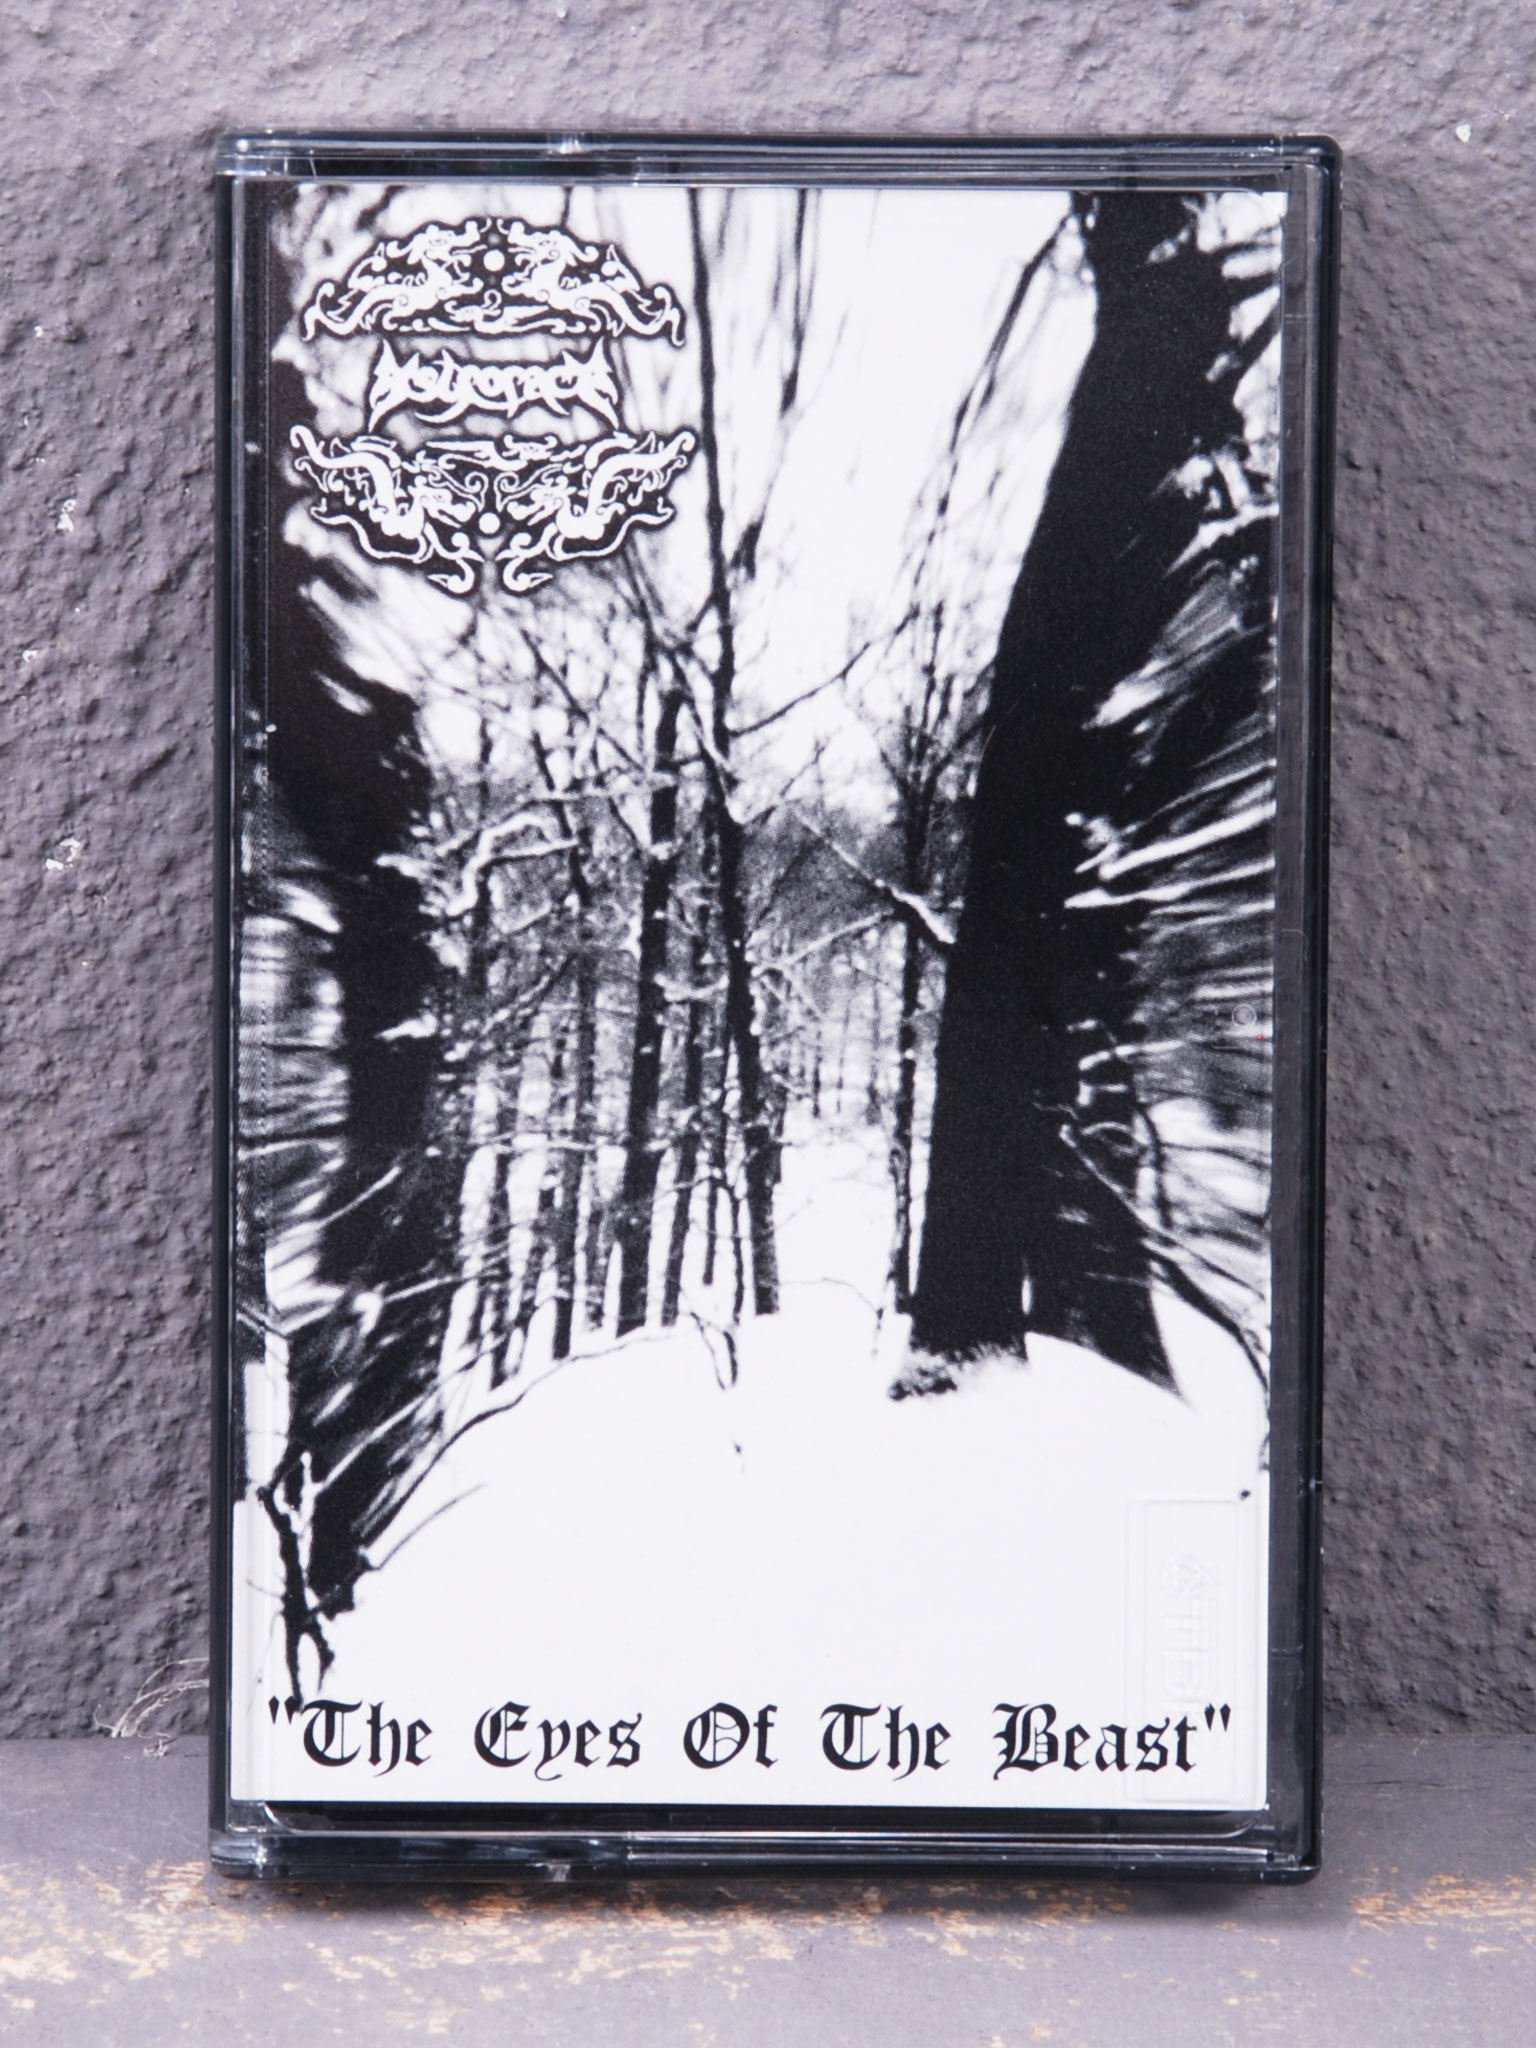 Astrofaes - The Eyes Of The Beast Tape